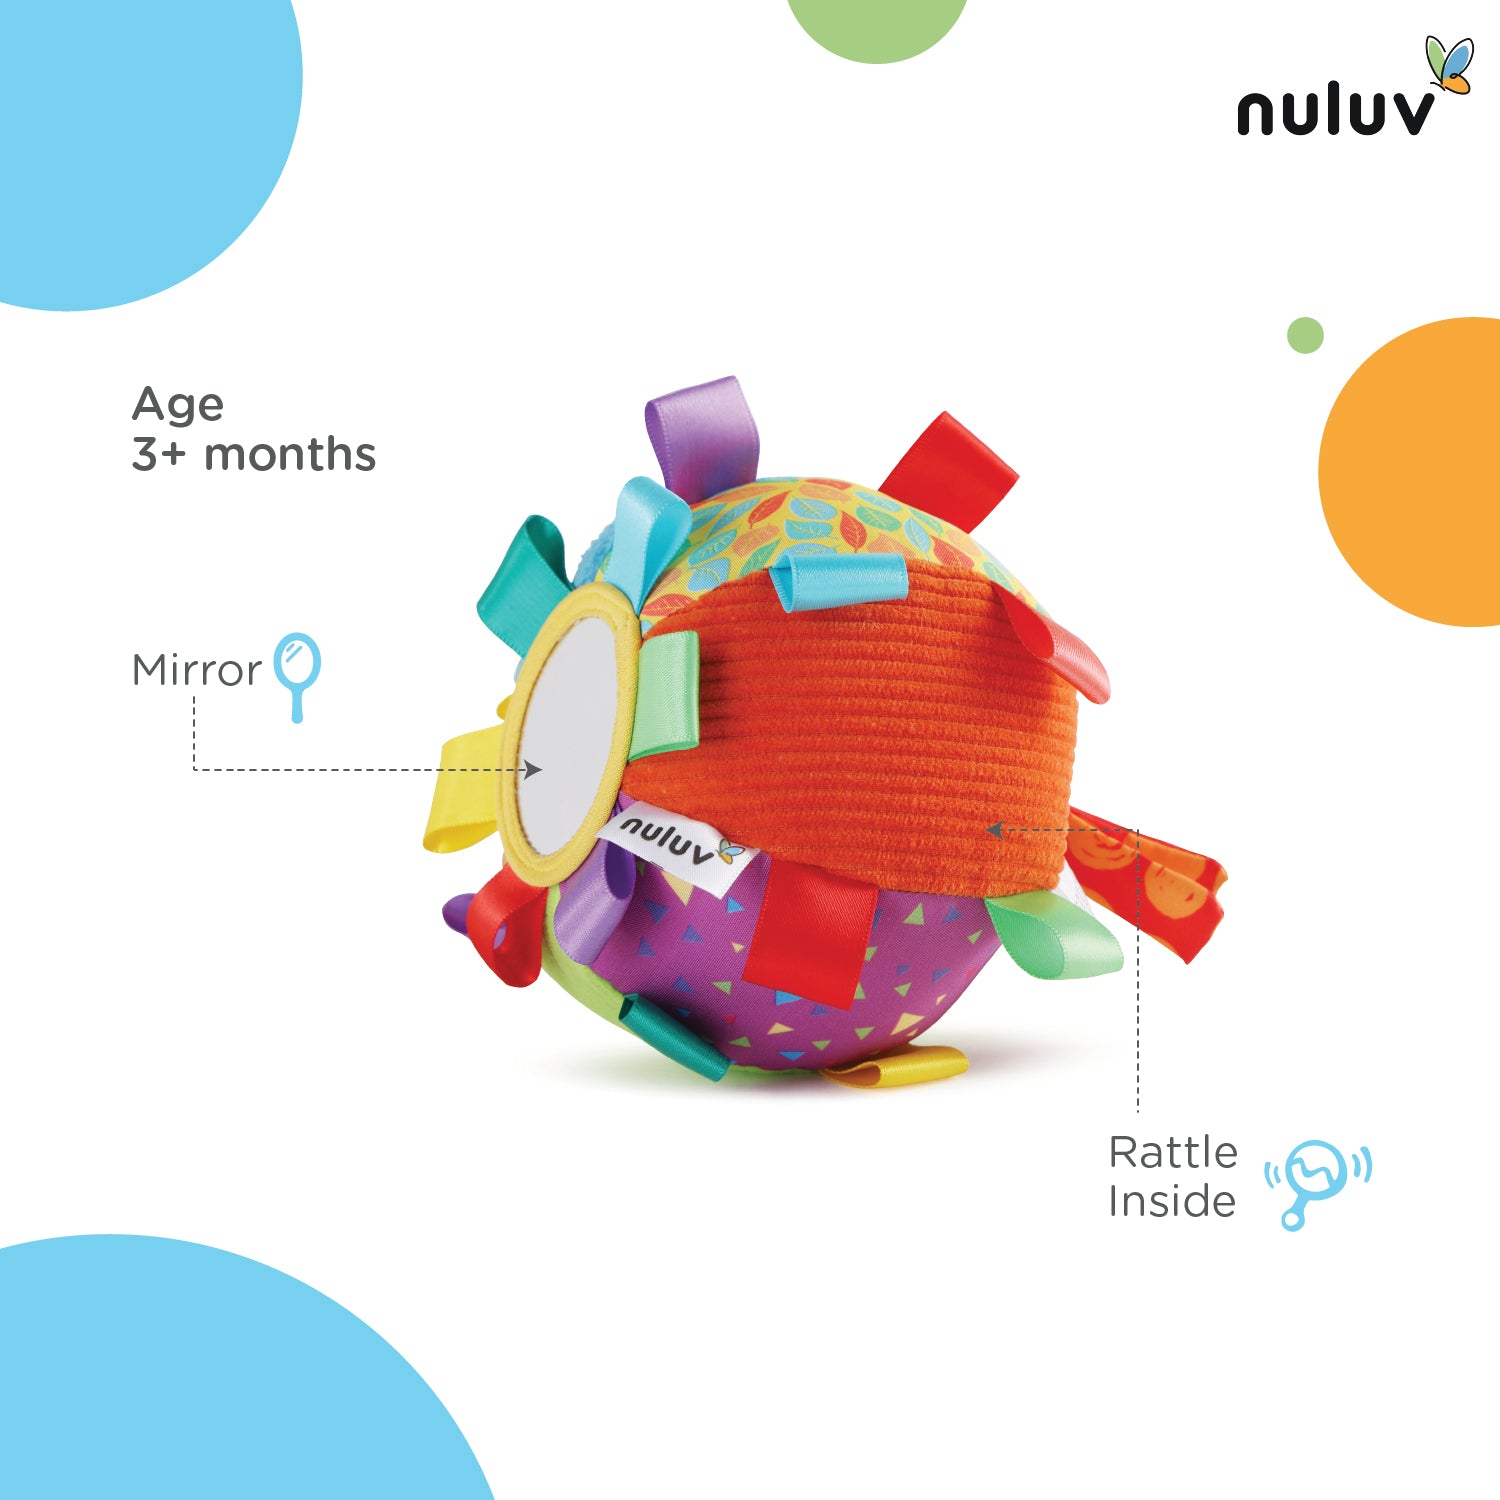 Nuluv Activity Ball - 1 Soft Plush Baby Ball, Multicolor